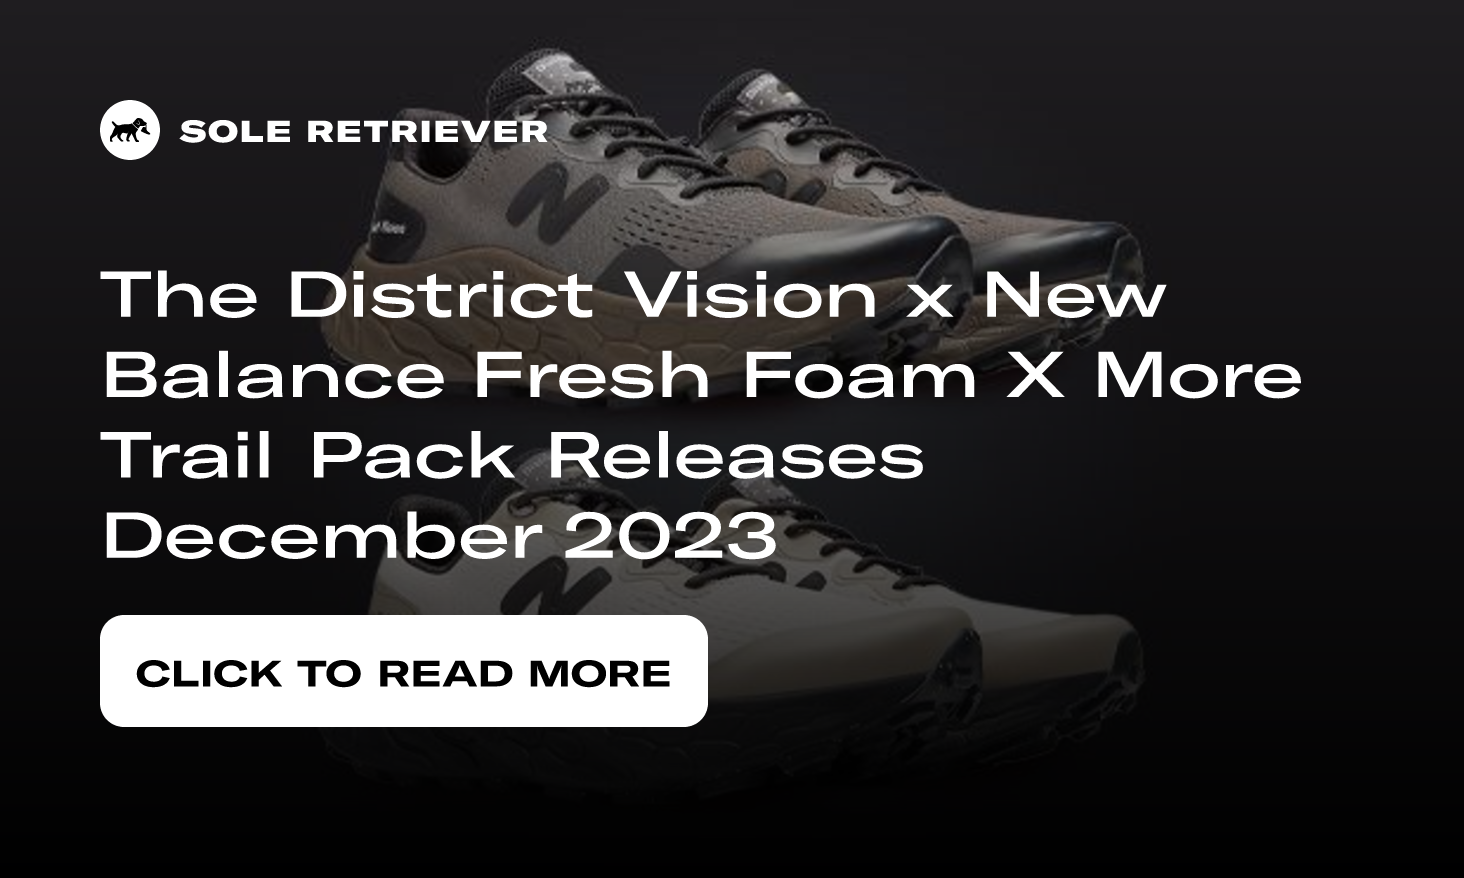 The District Vision x New Balance Fresh Foam X More Trail Pack